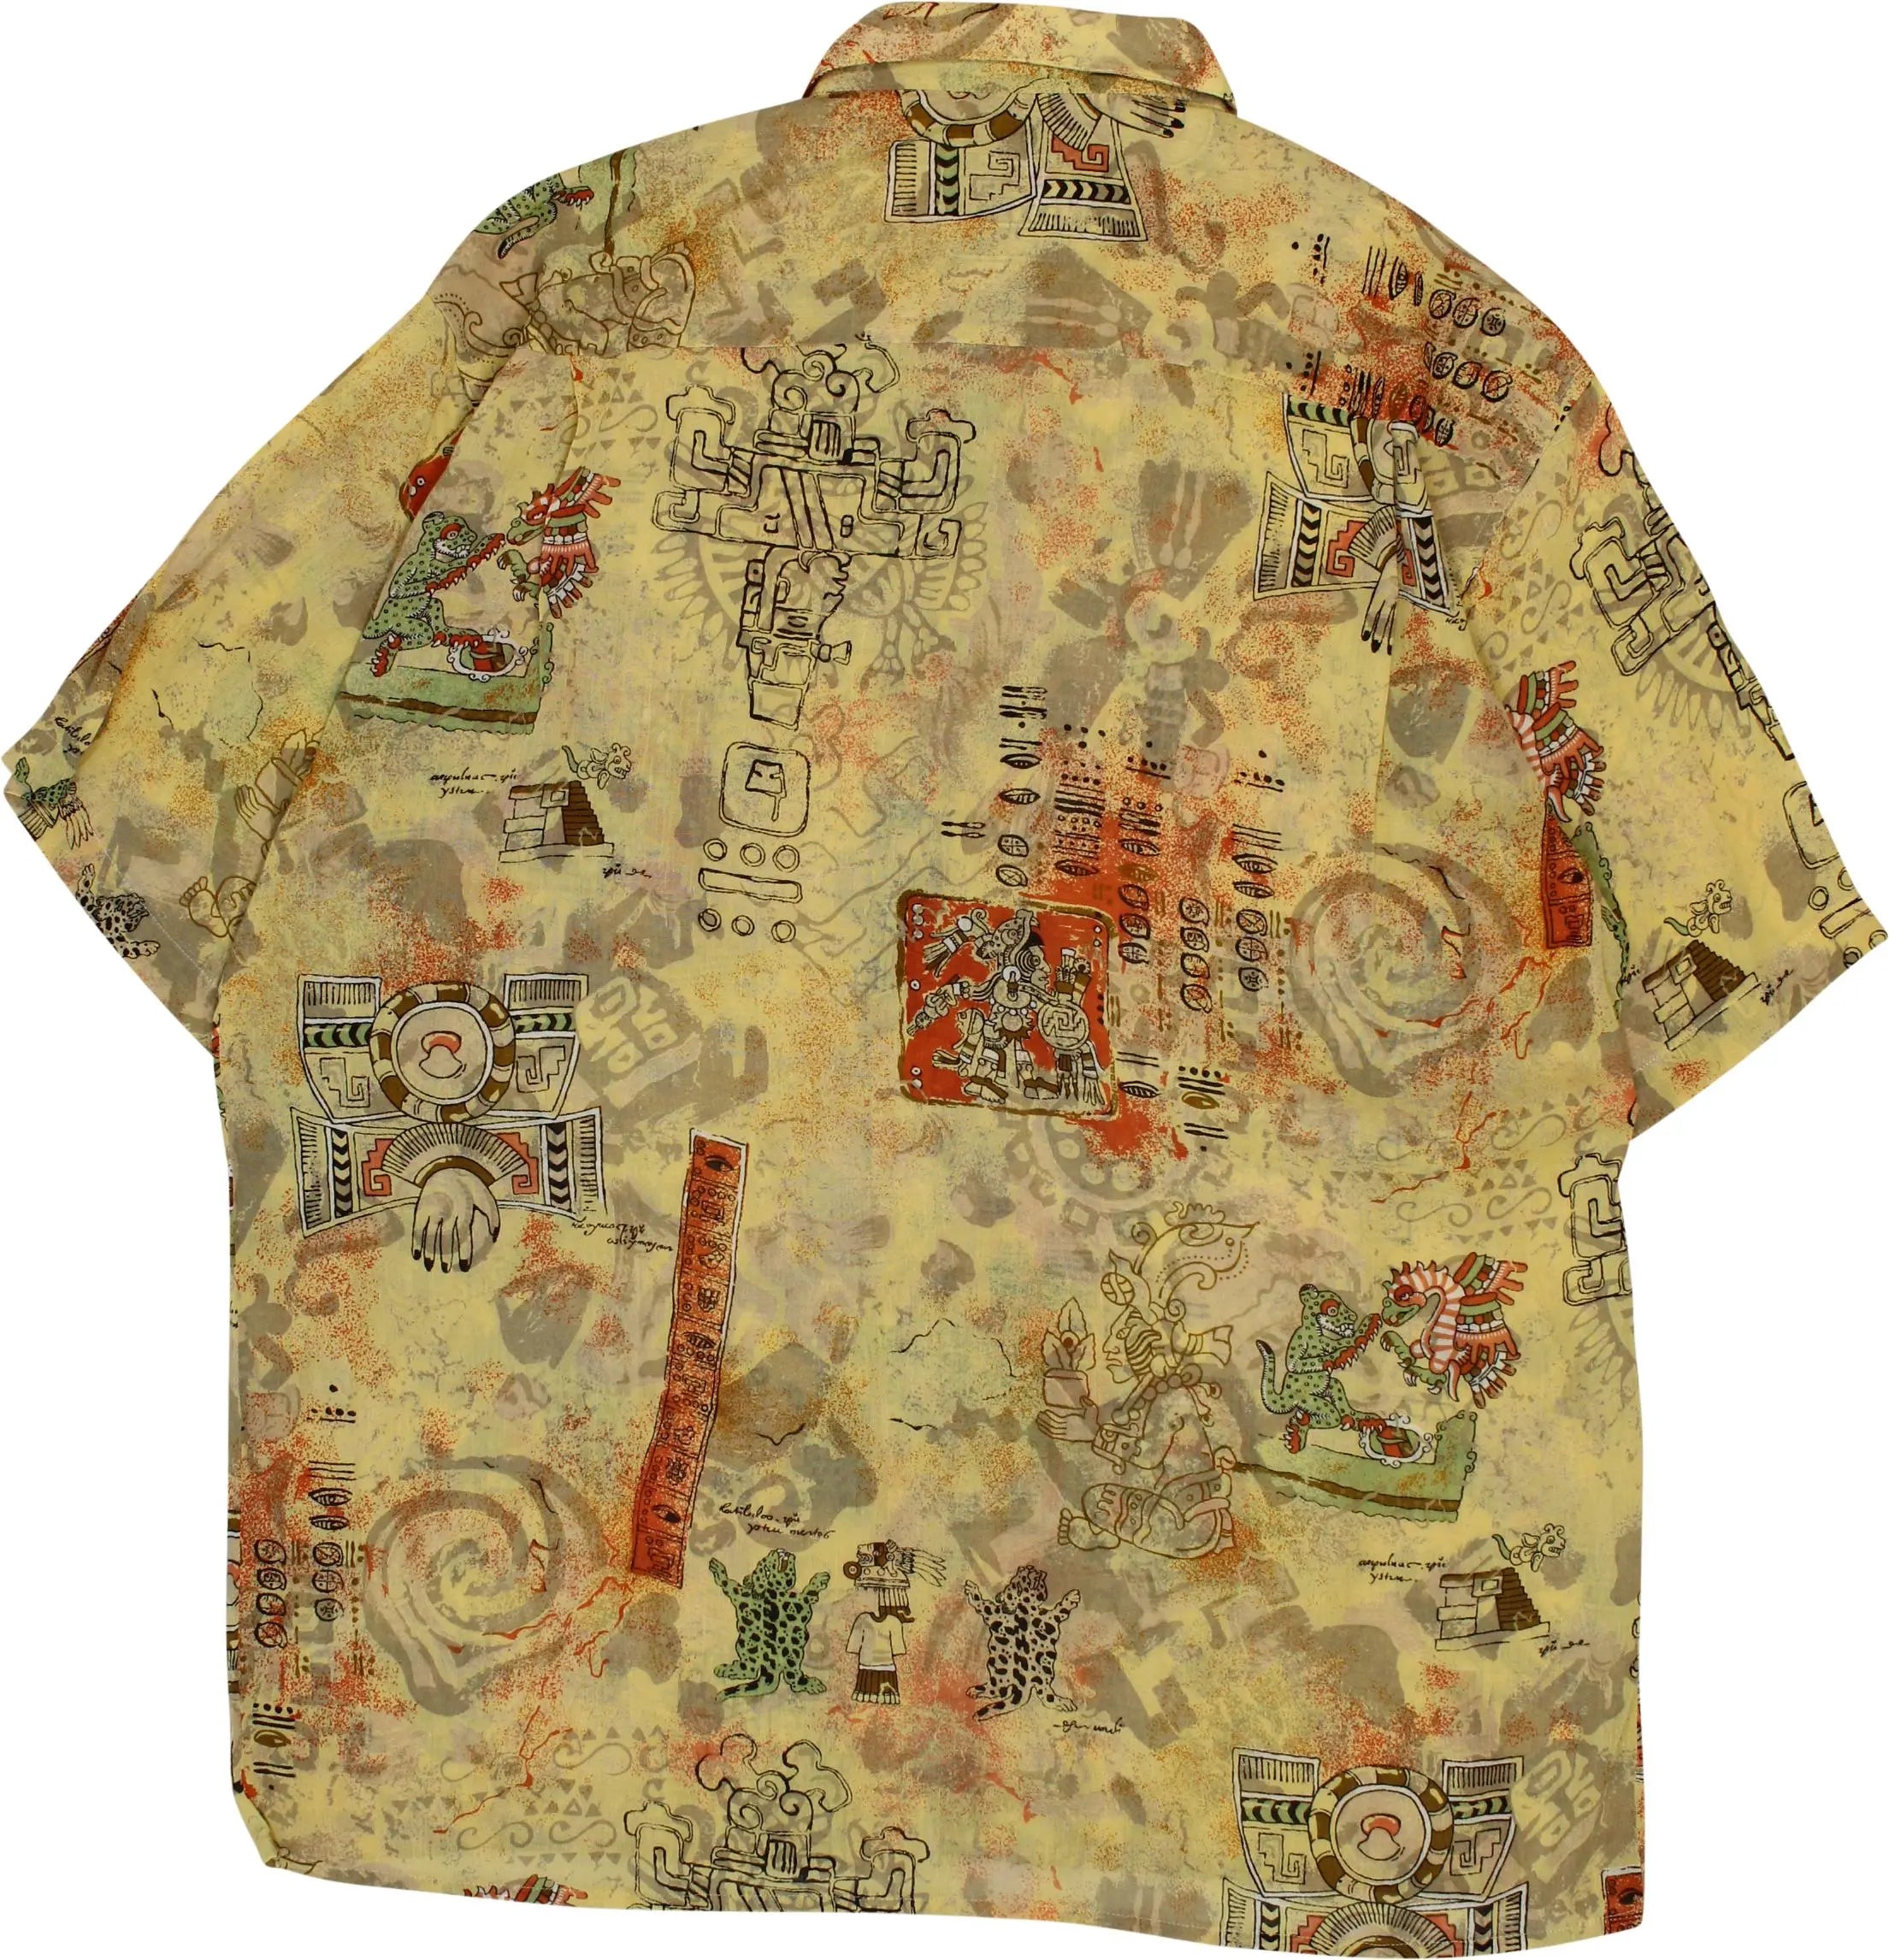 Tony D. - 90s Patterned Shirt- ThriftTale.com - Vintage and second handclothing